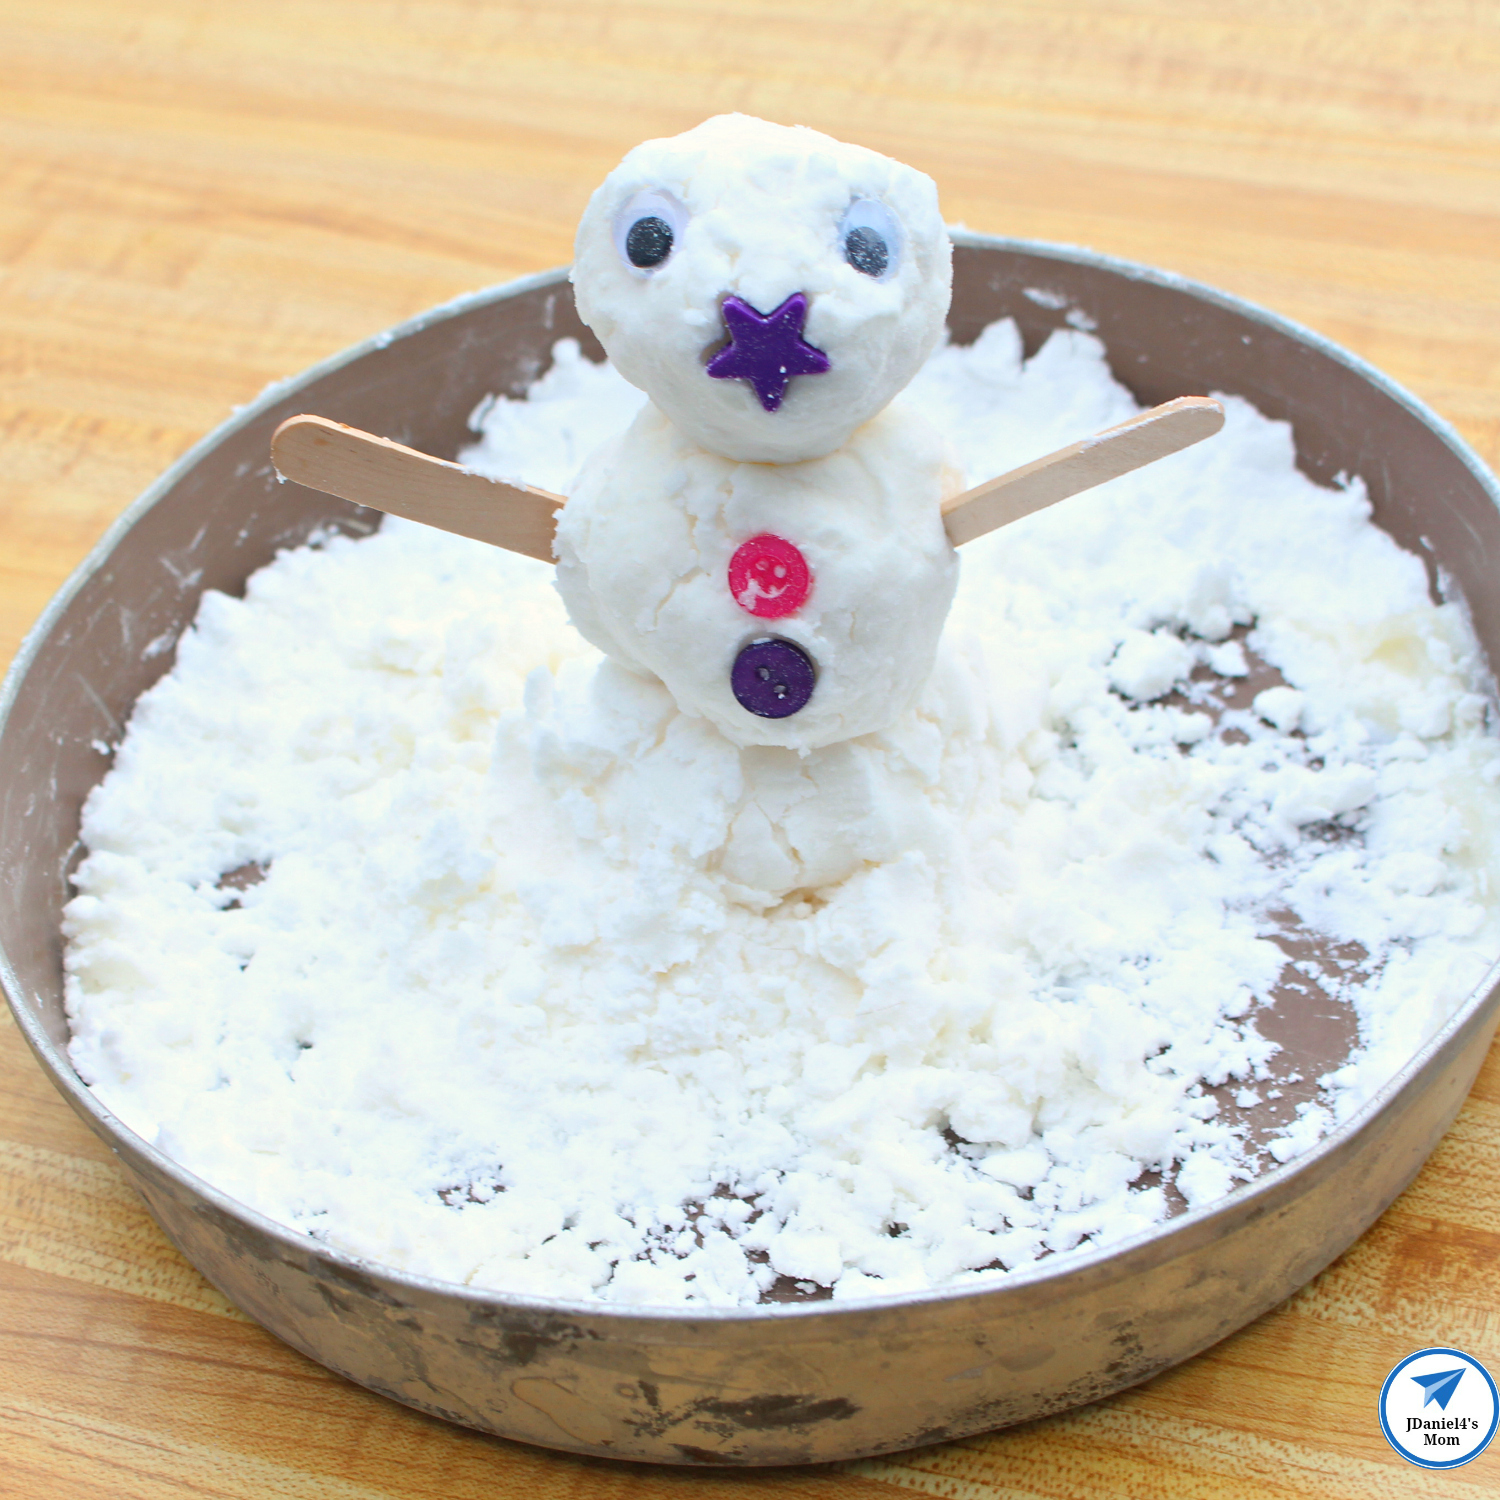 How to Make Fake Snow Recipes and Algorithm Activity with Baking Soda and Hair Conditioner-Close Up of Snowman Facing Front